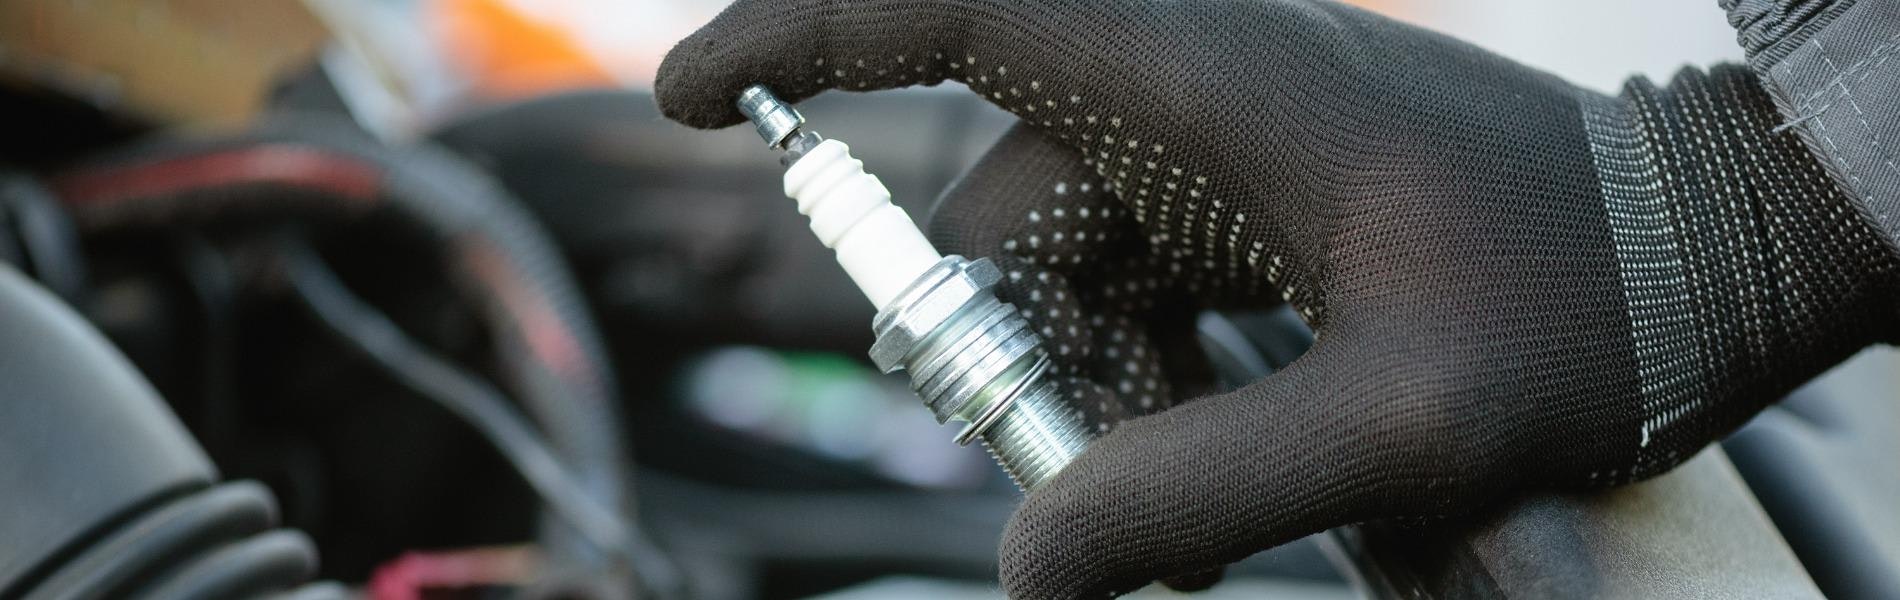 What Are Some Signs Your Car Needs a Tune-Up (Explained)